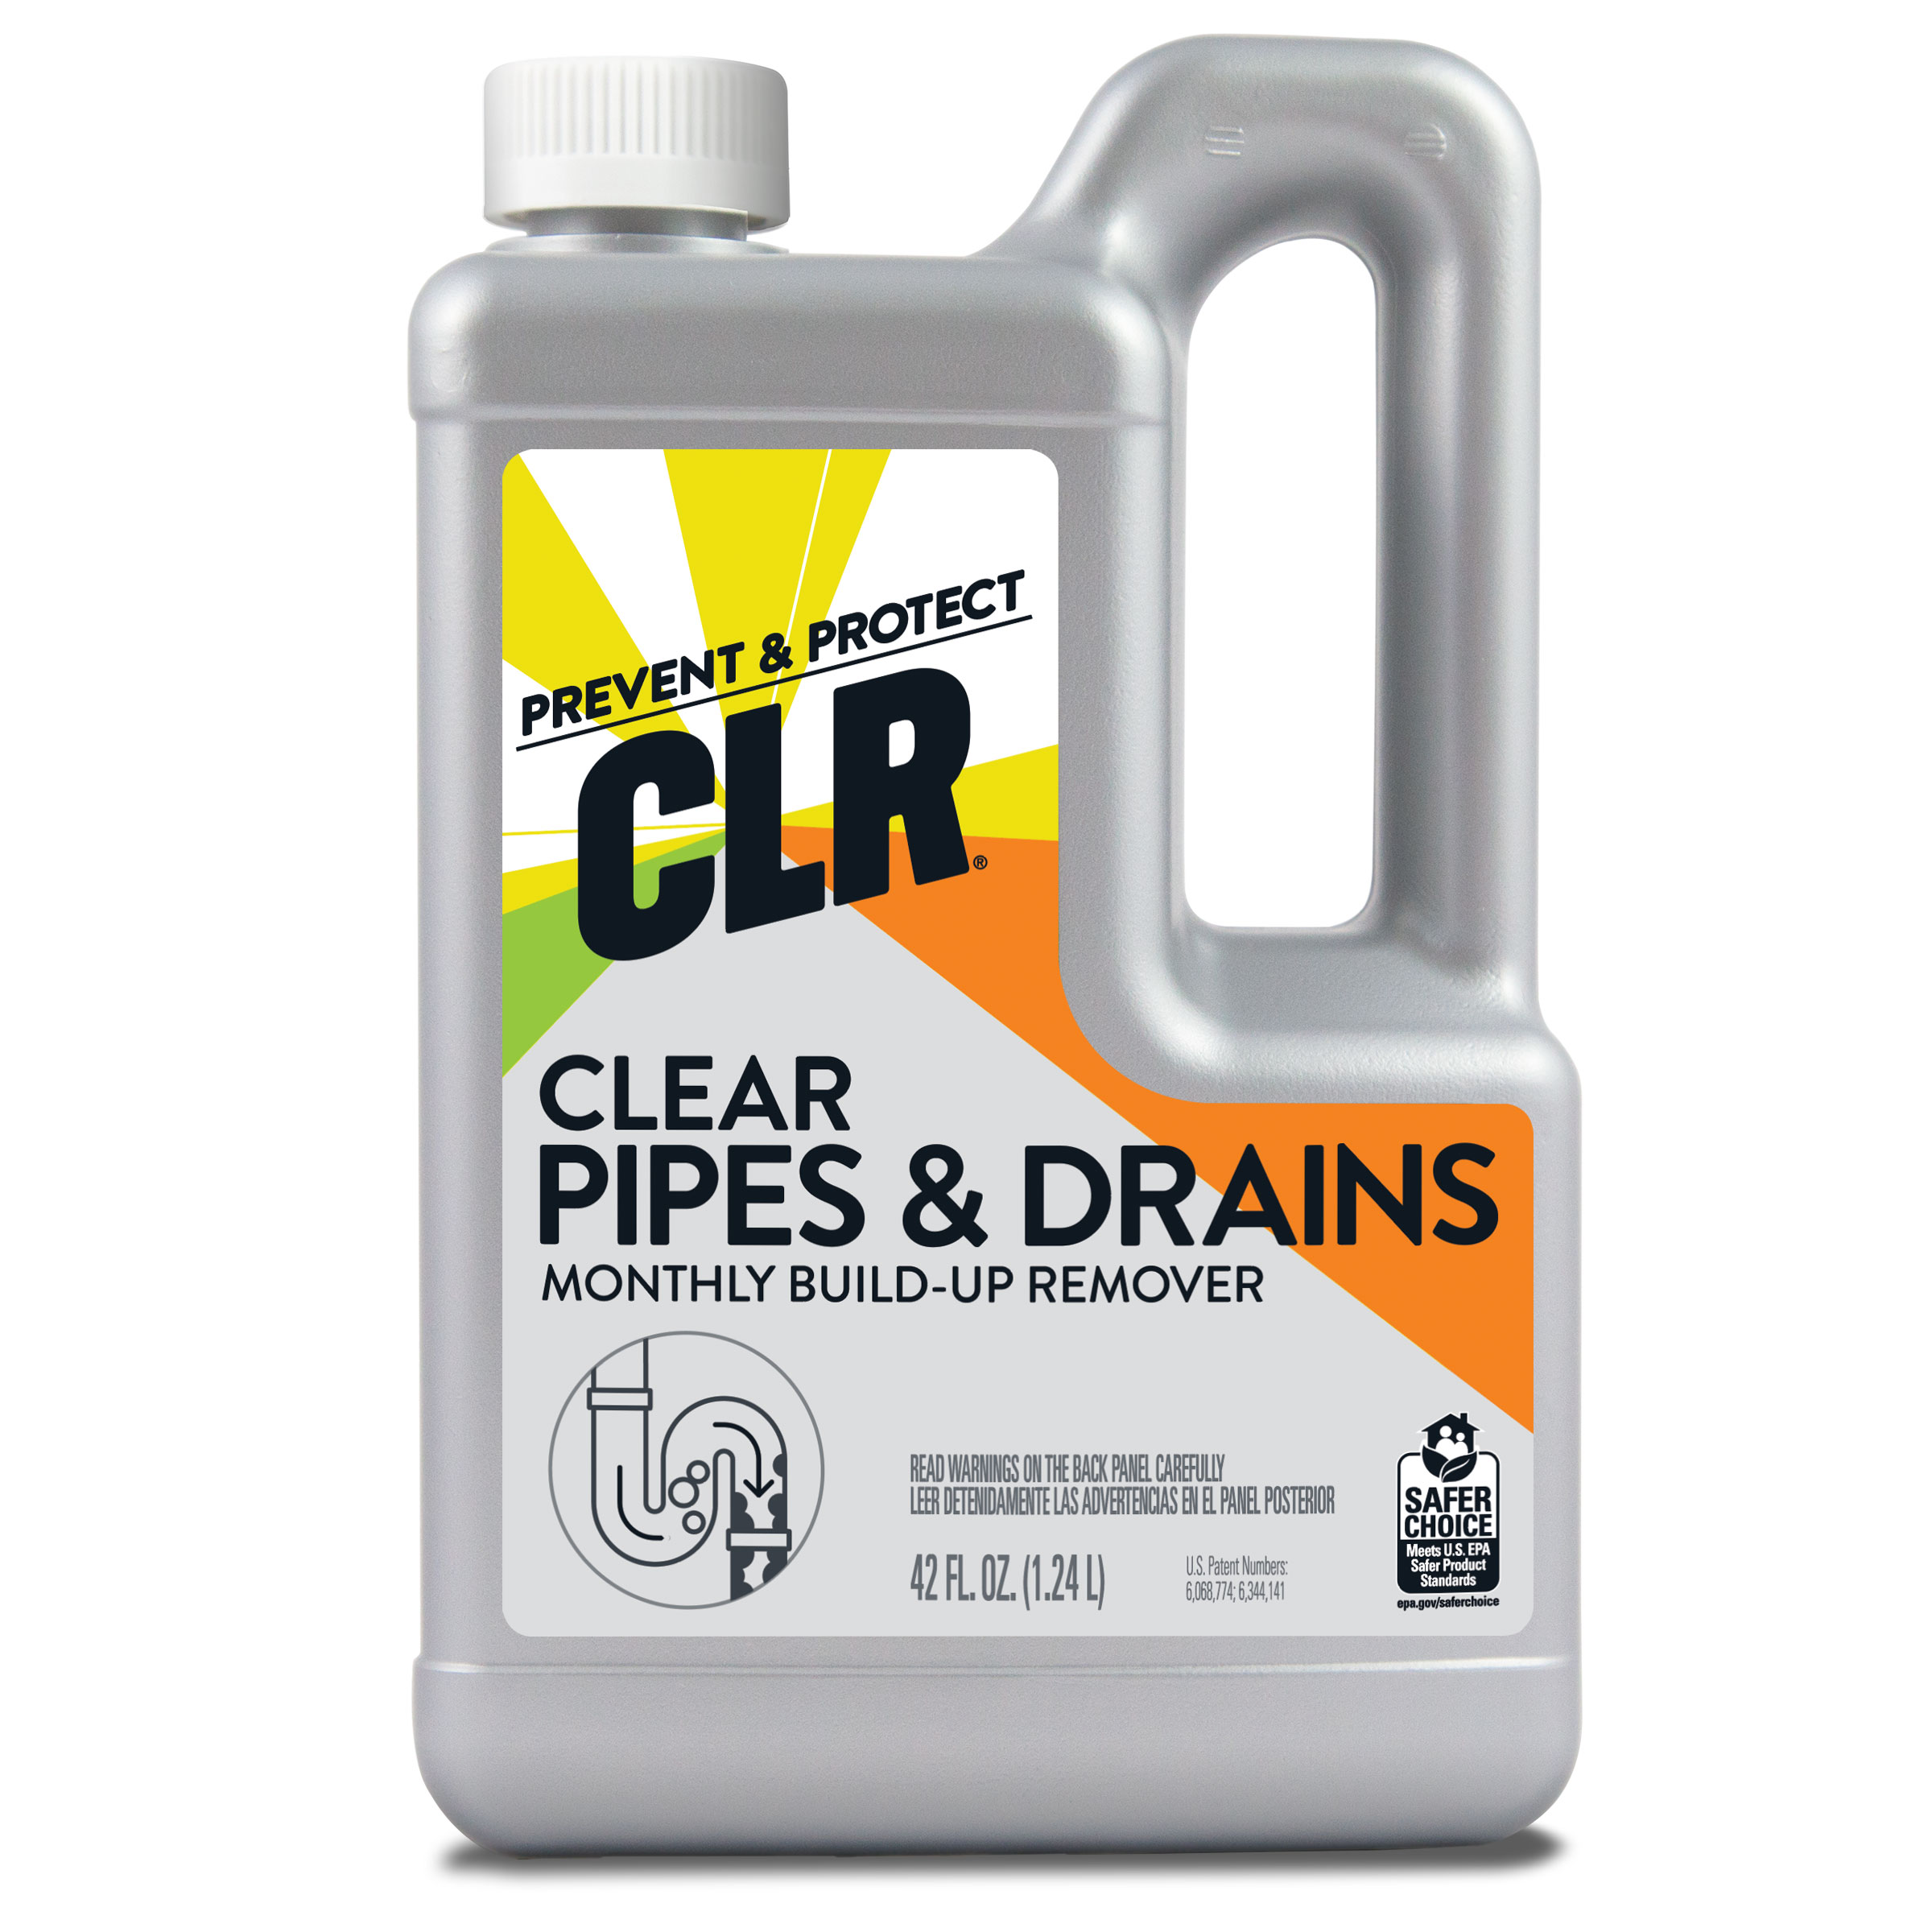 Shower Drain Clog Remover Tub Toilet Clogged Drains Relief